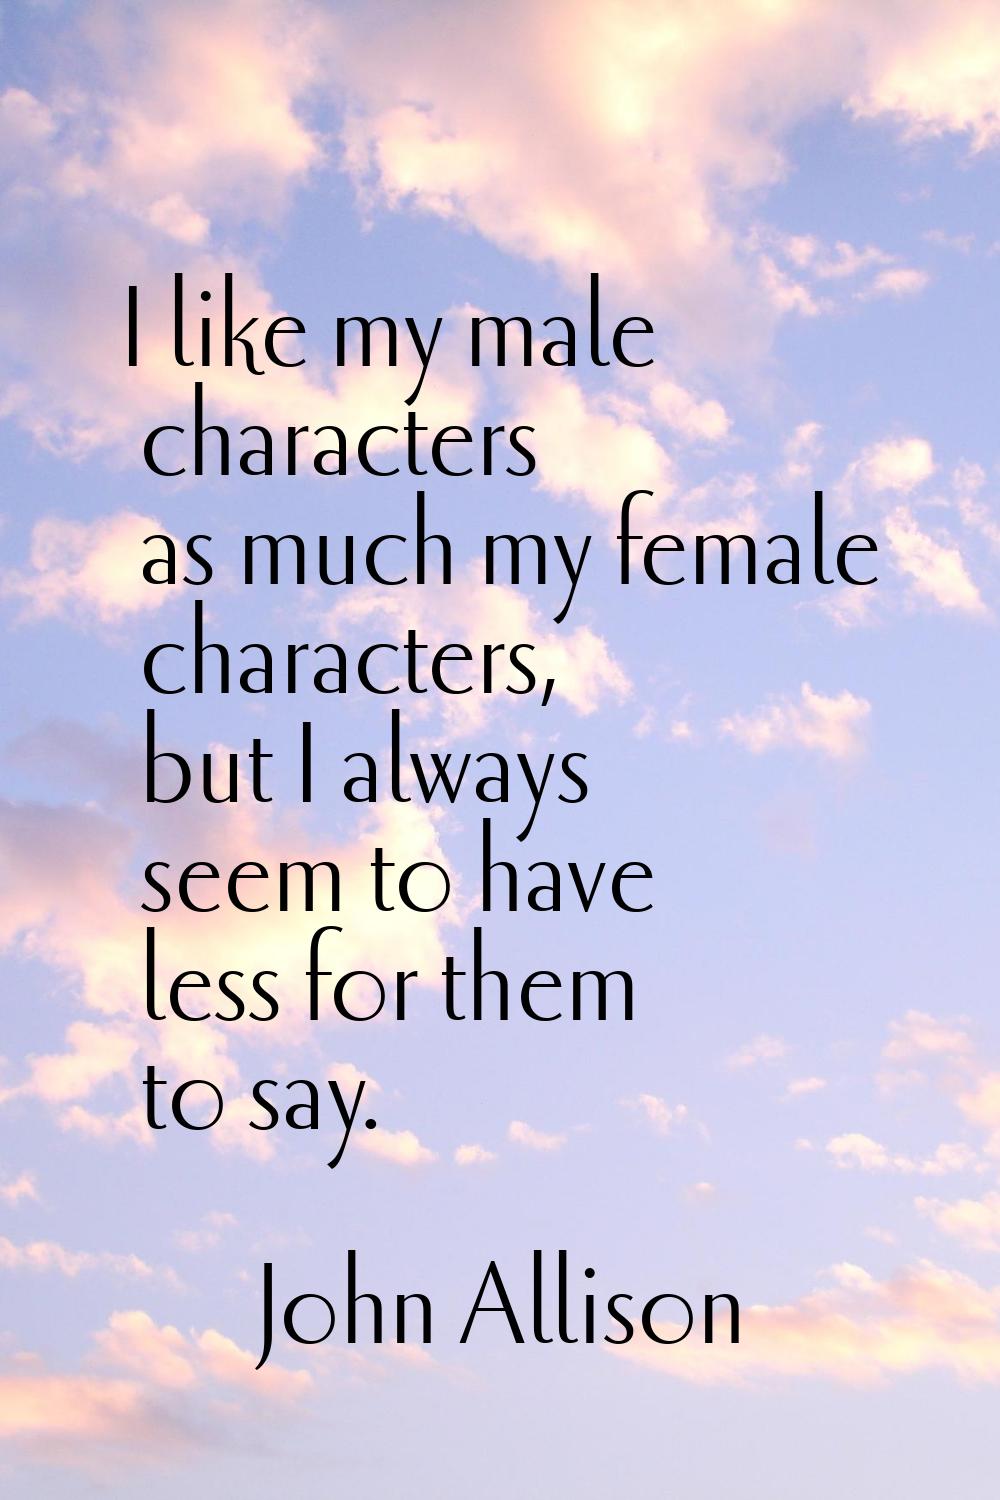 I like my male characters as much my female characters, but I always seem to have less for them to 